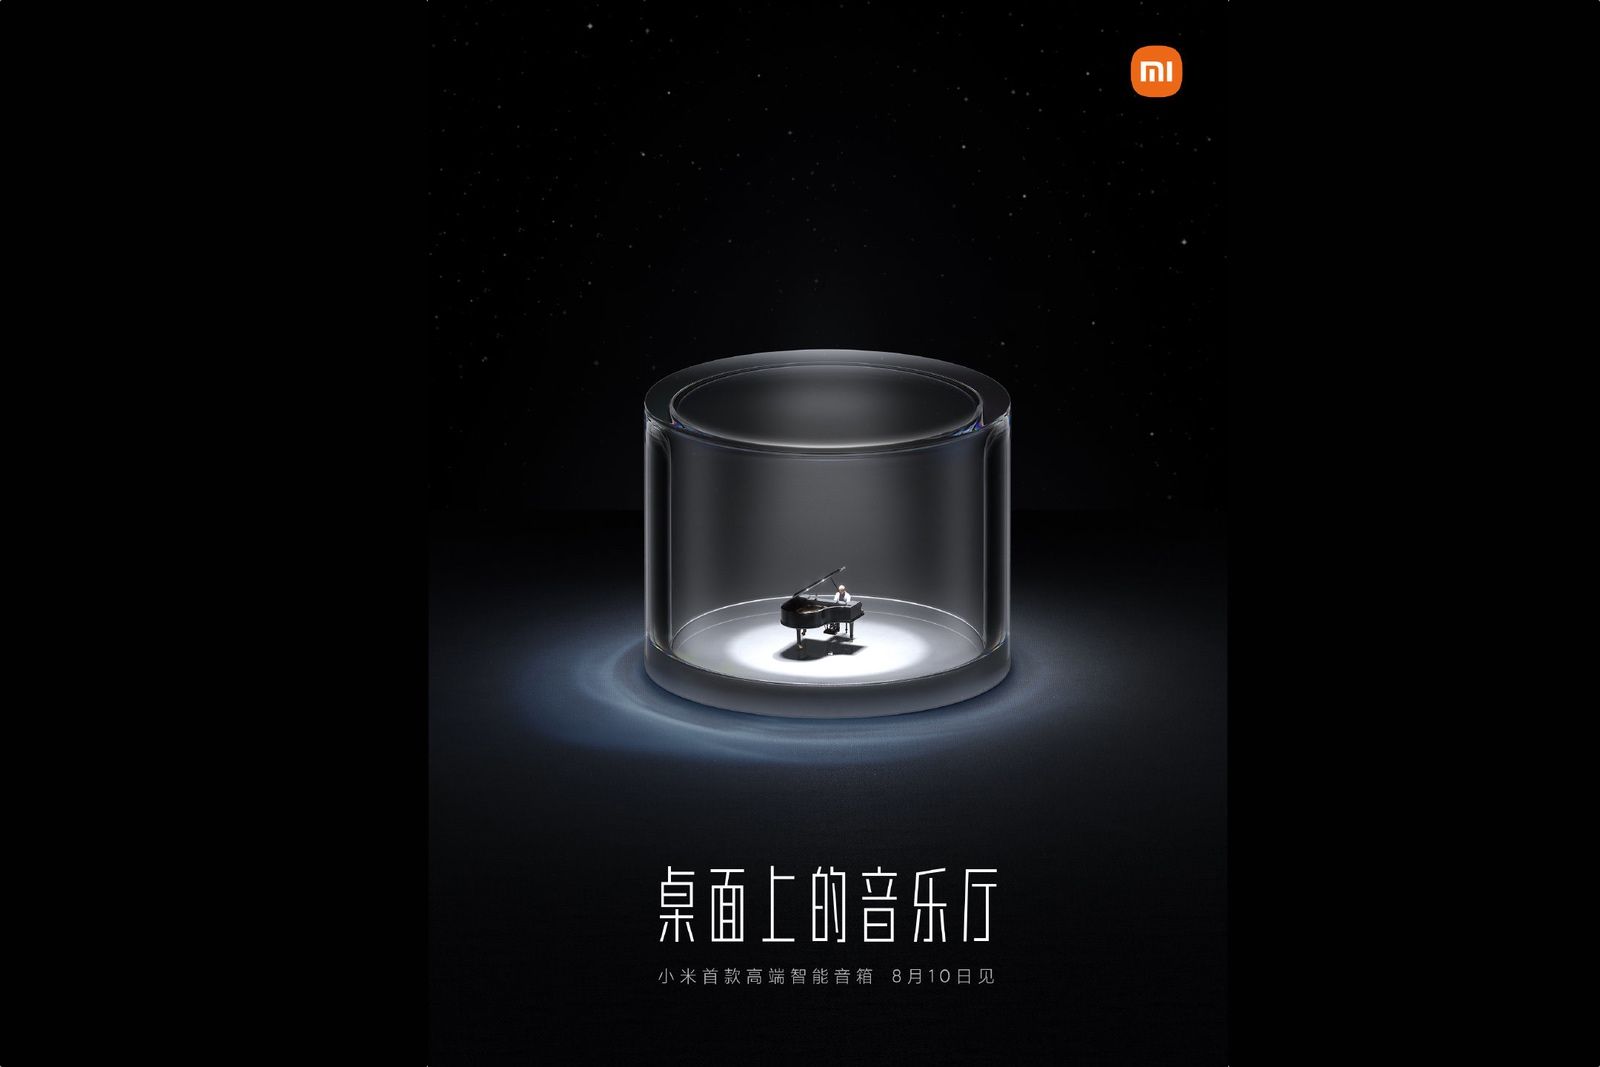 Xiaomi Smart Speaker teased ahead of official unveil - and it looks set to be small but mighty photo 1